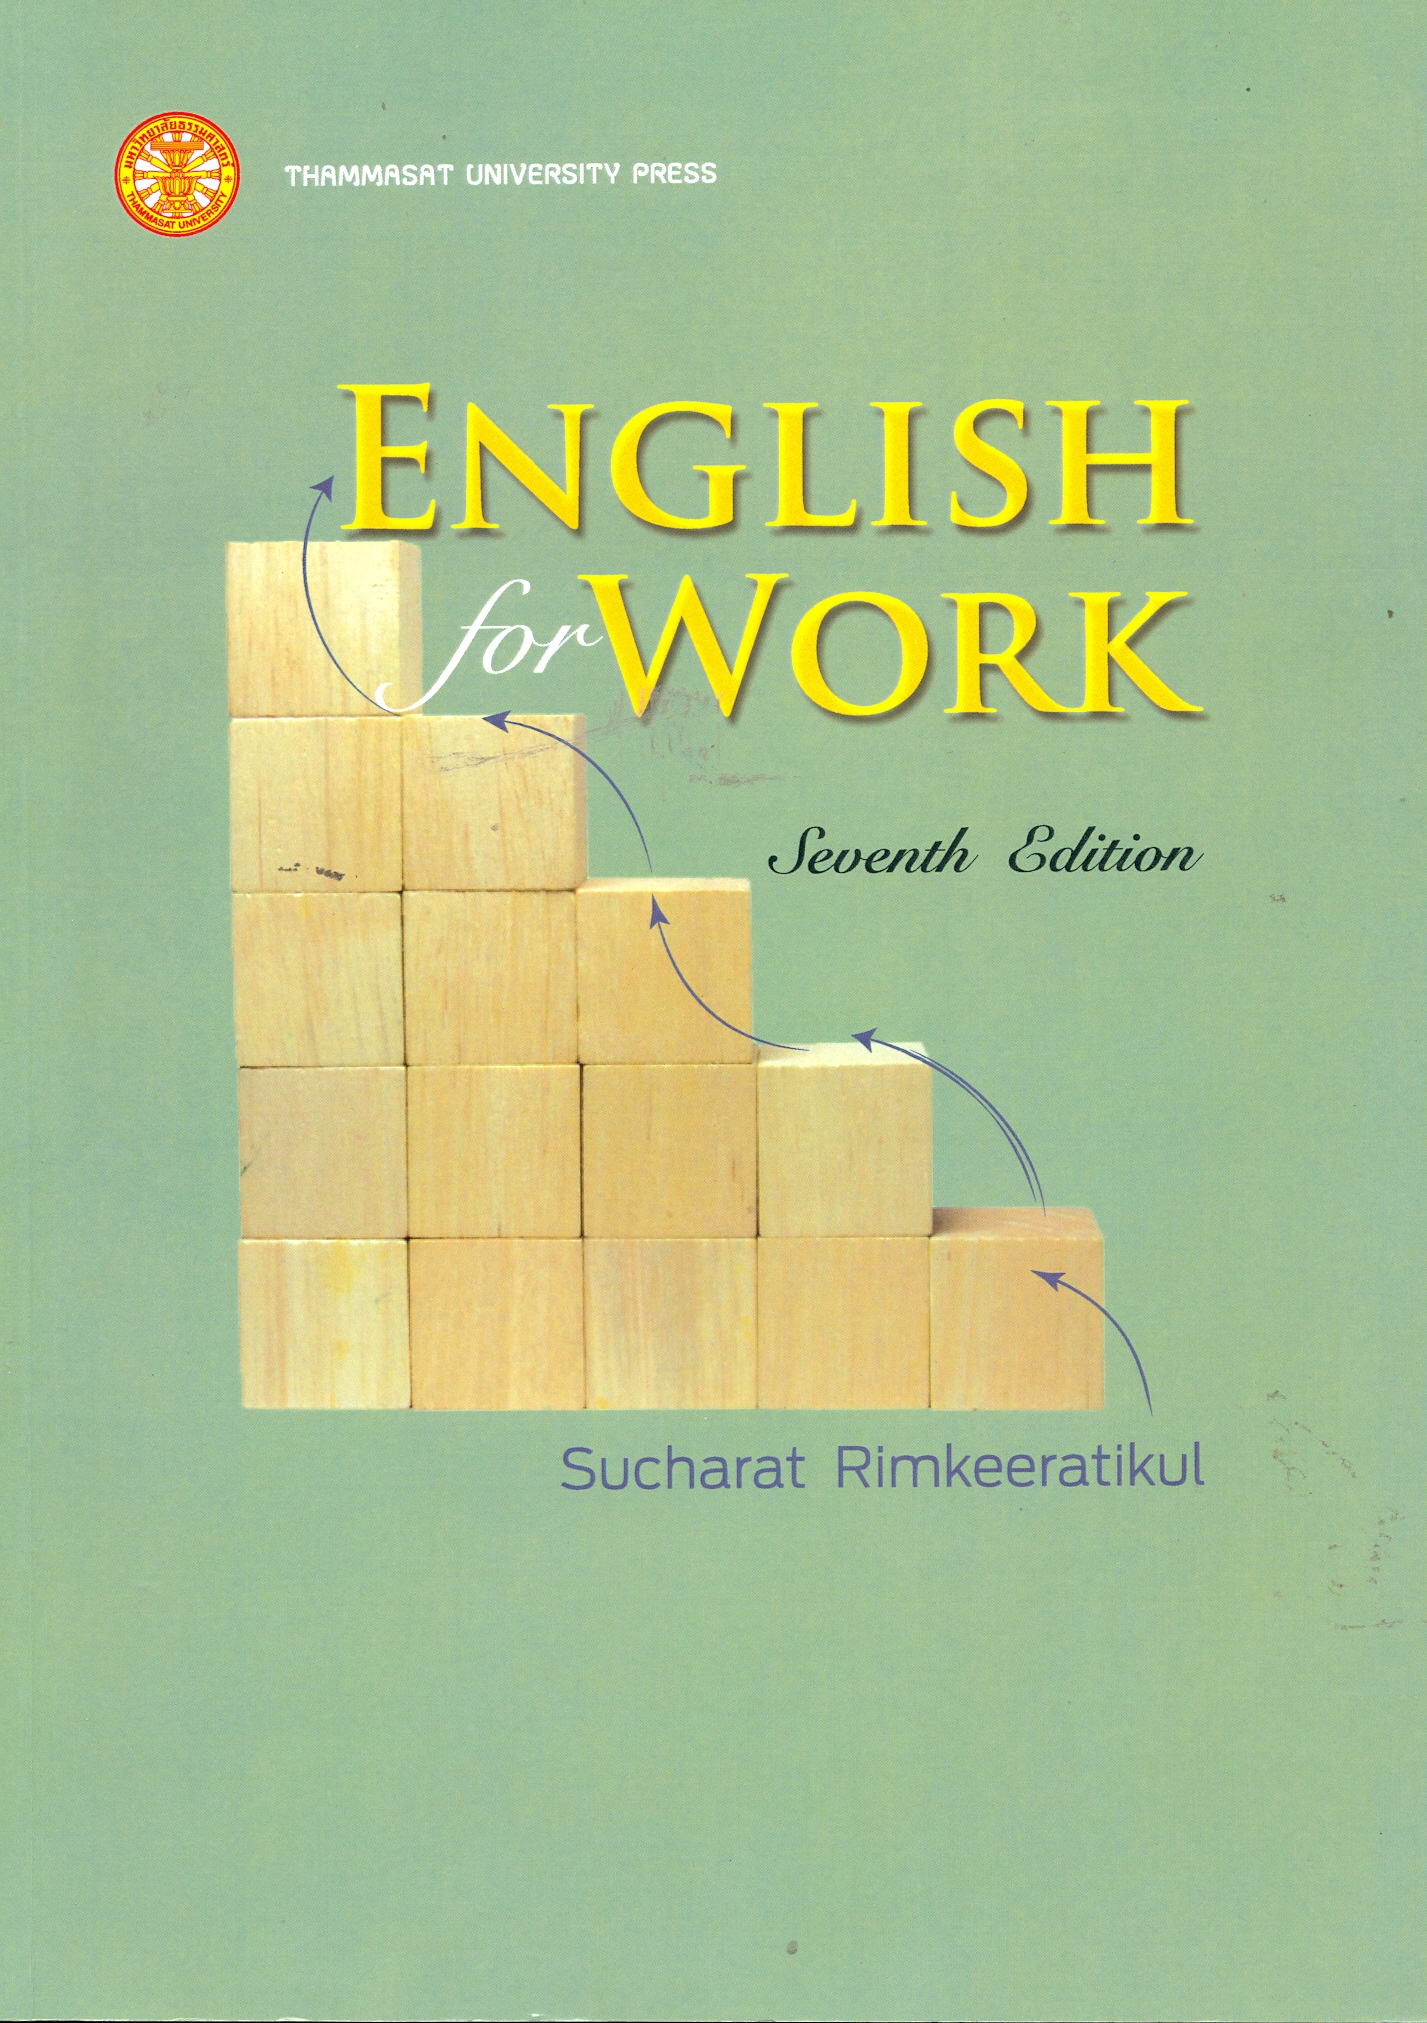 English for work